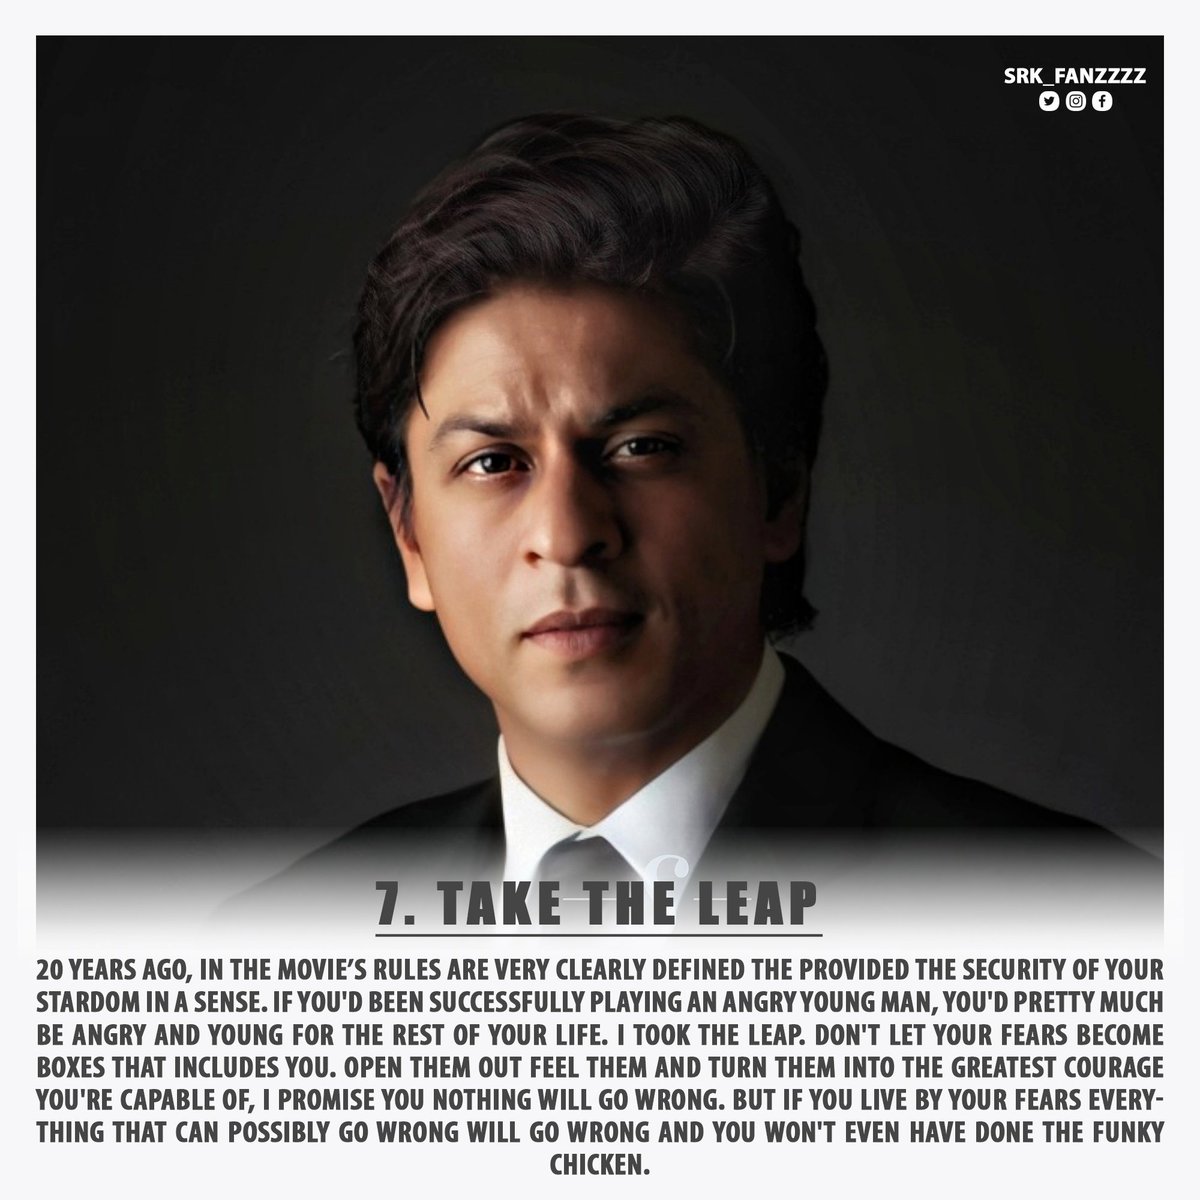 For those who need it, SHAH RUKH KHAN'S TOP 13 RULES FOR SUCCESS (2/4) @iamsrk  #HappyTeachersDay #ShahRukhKhan